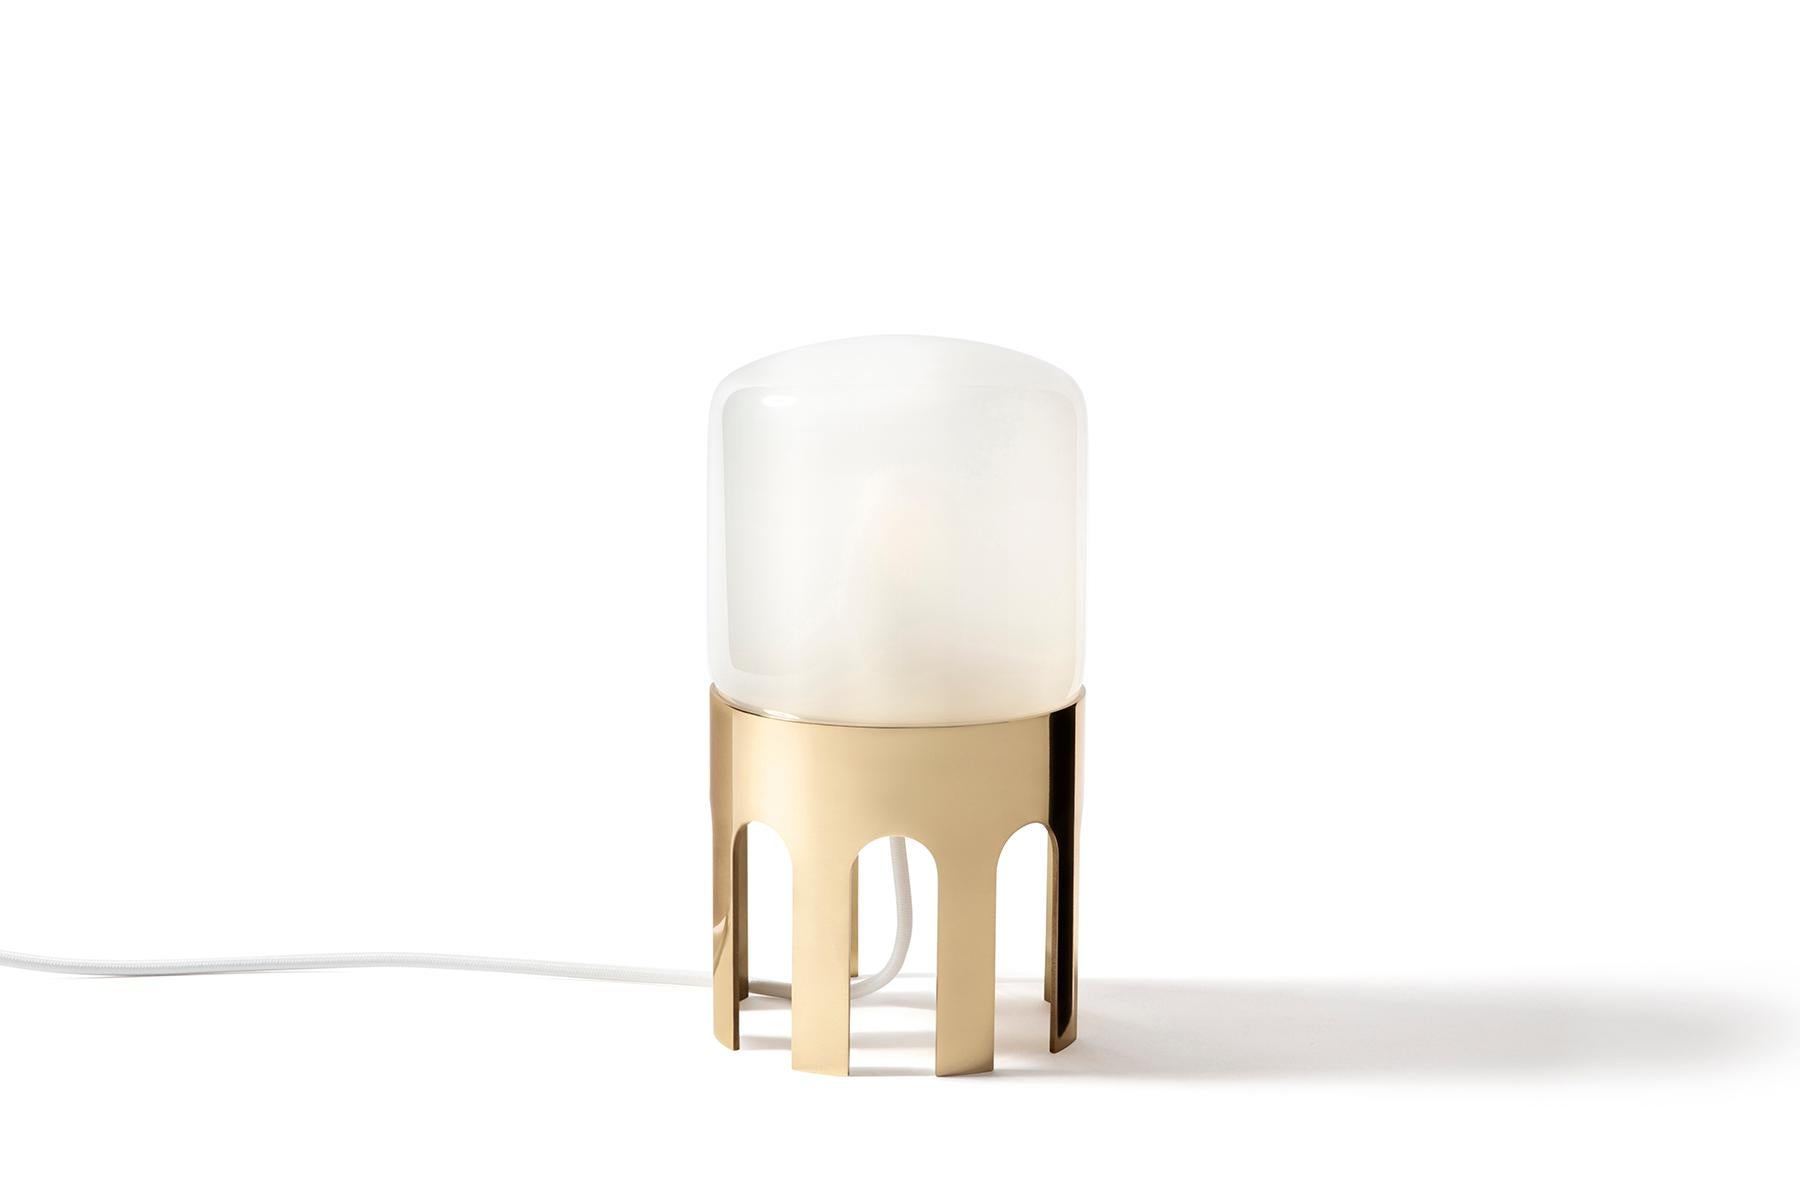 Table lamp inspired by the architecture of water towers, made in polished brass and blown glass diffuser.
Design GoodMorning Studio for Daythings  

(These are products made in Italy by artisanal processes. Material and color variation and slight